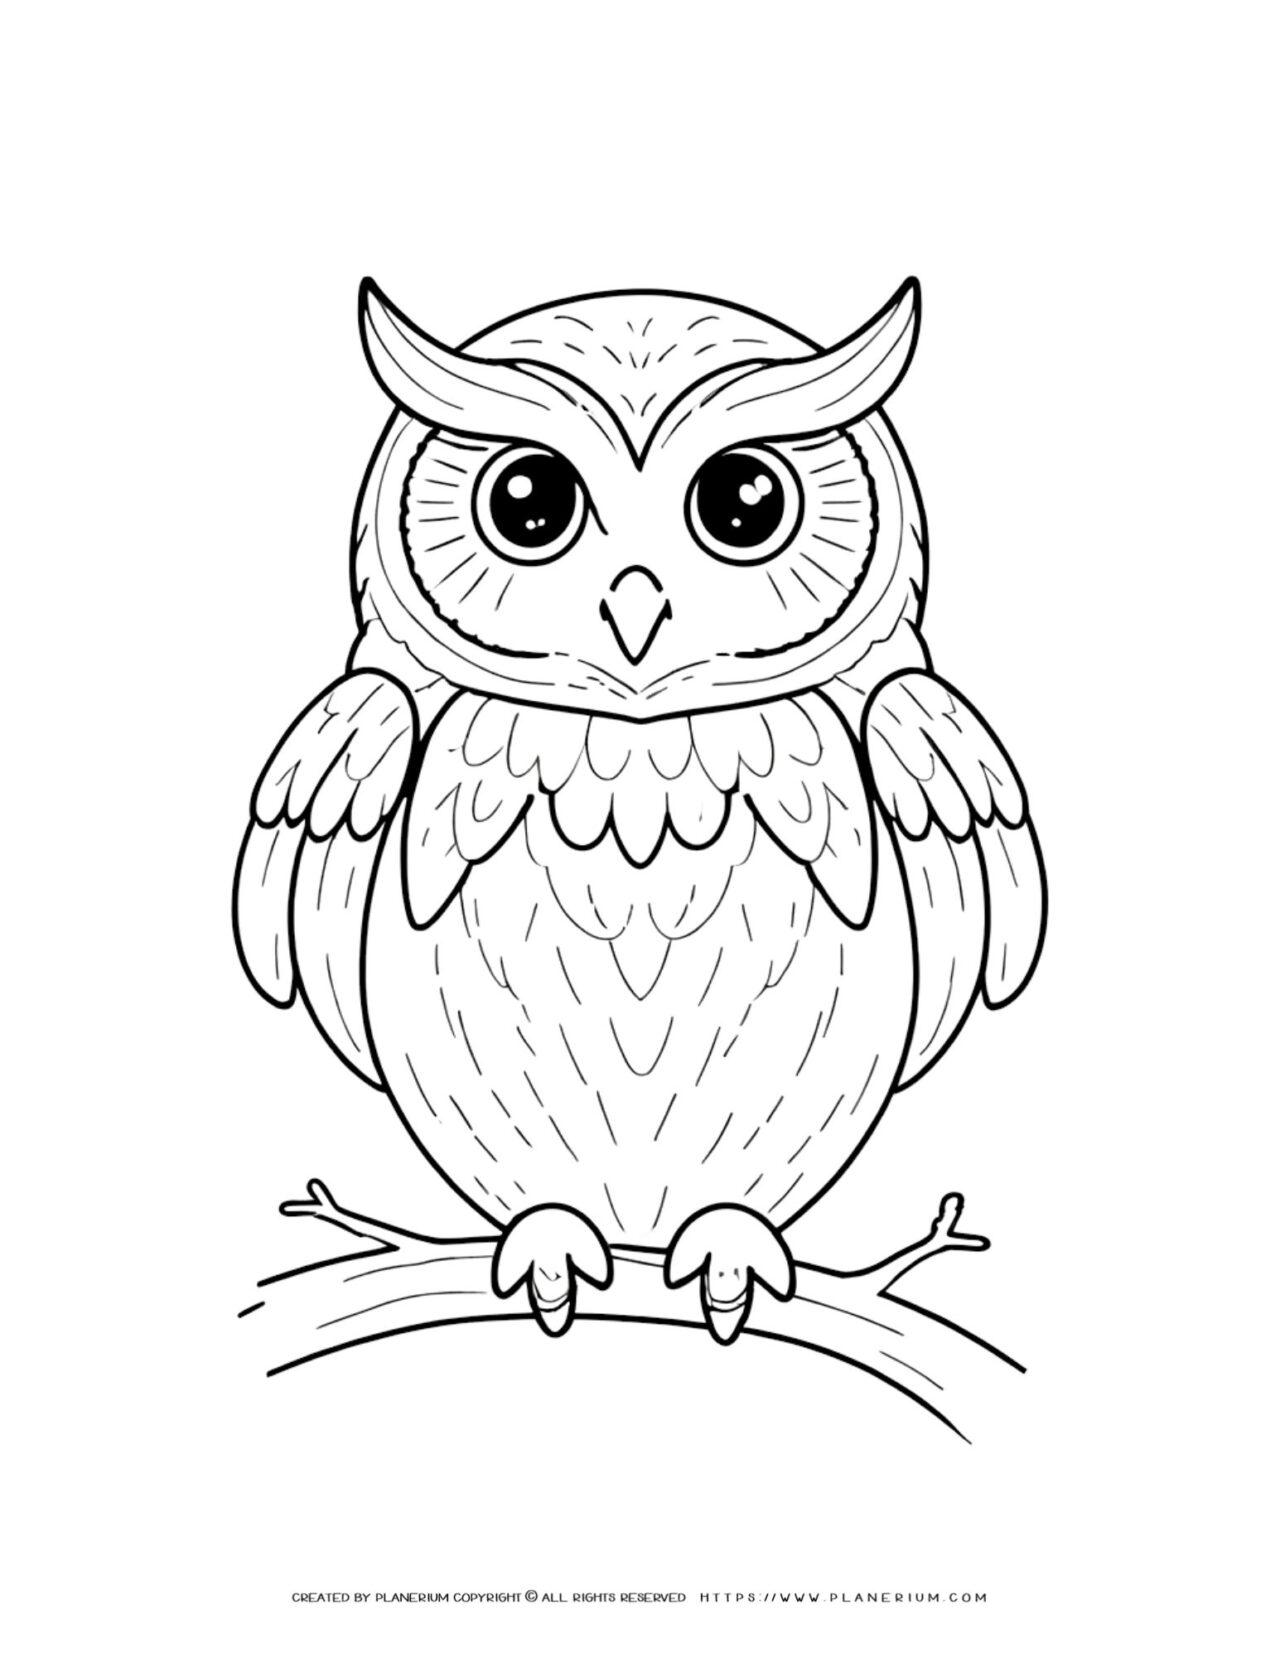 Owl-Outline-on-a-Branch-Animal-Coloring-Page-for-Kids